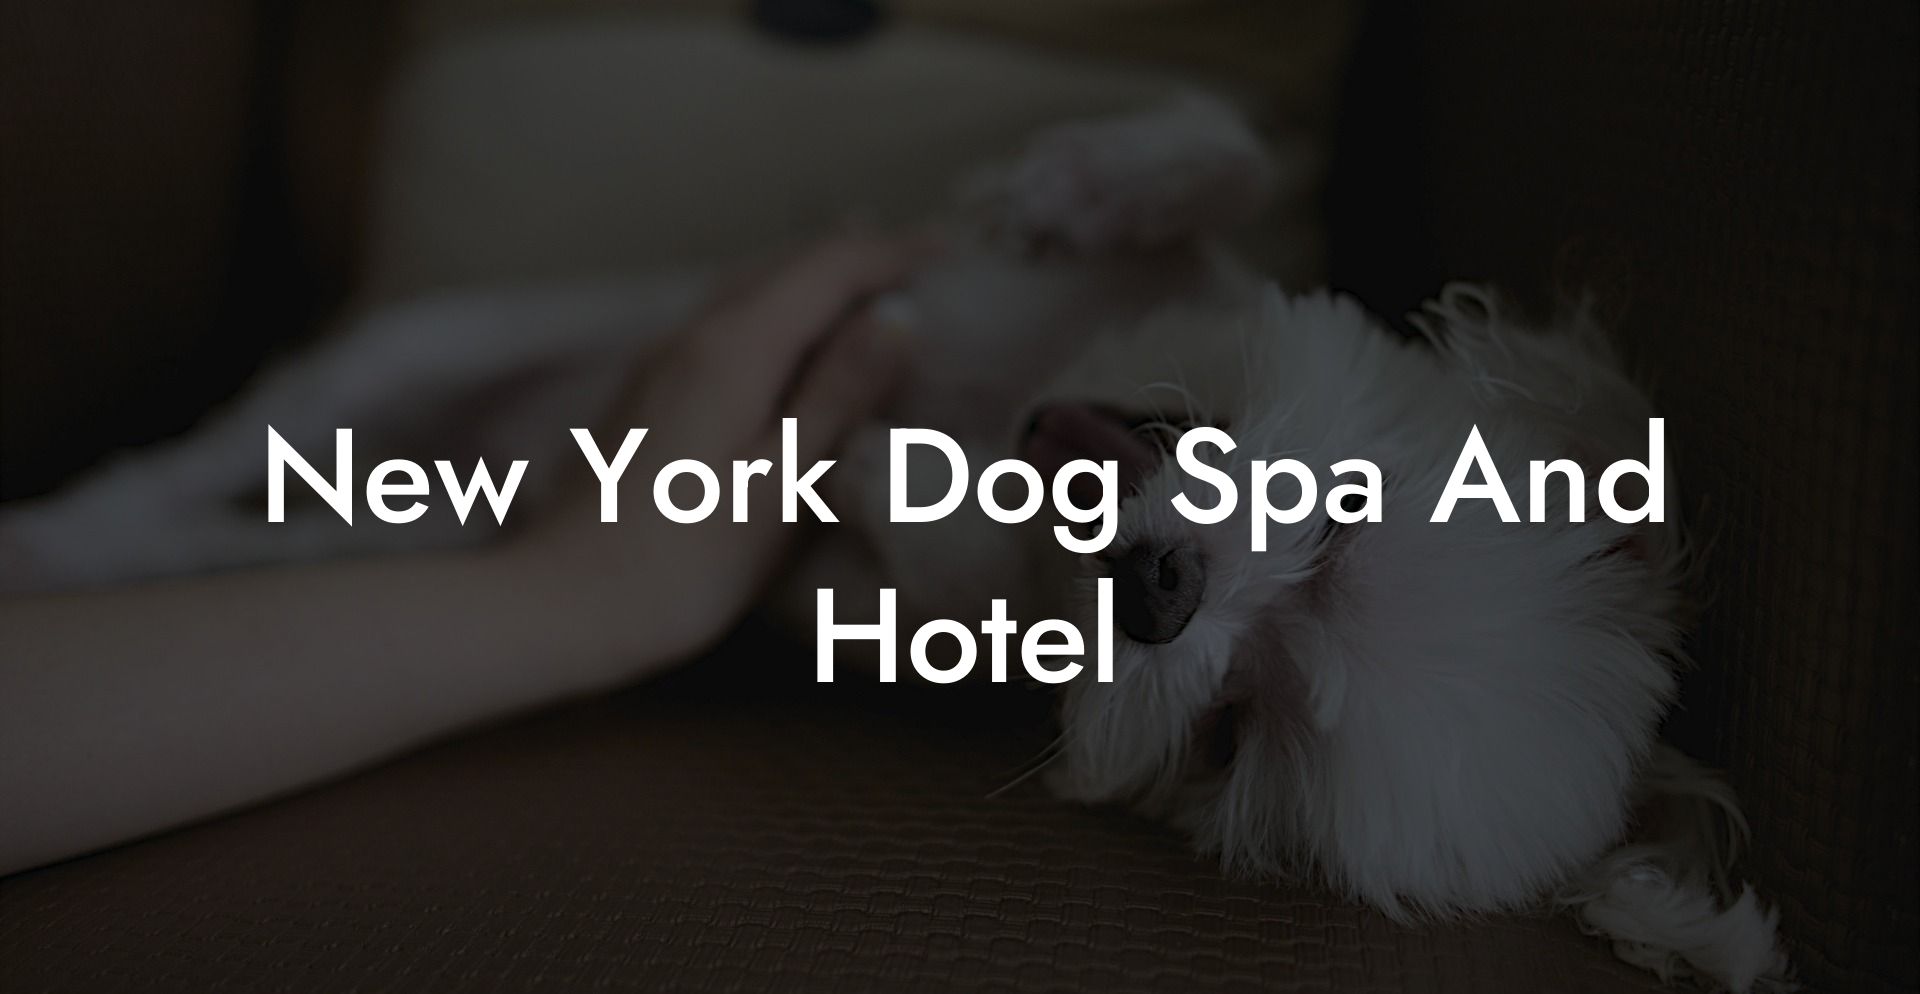 New York Dog Spa And Hotel